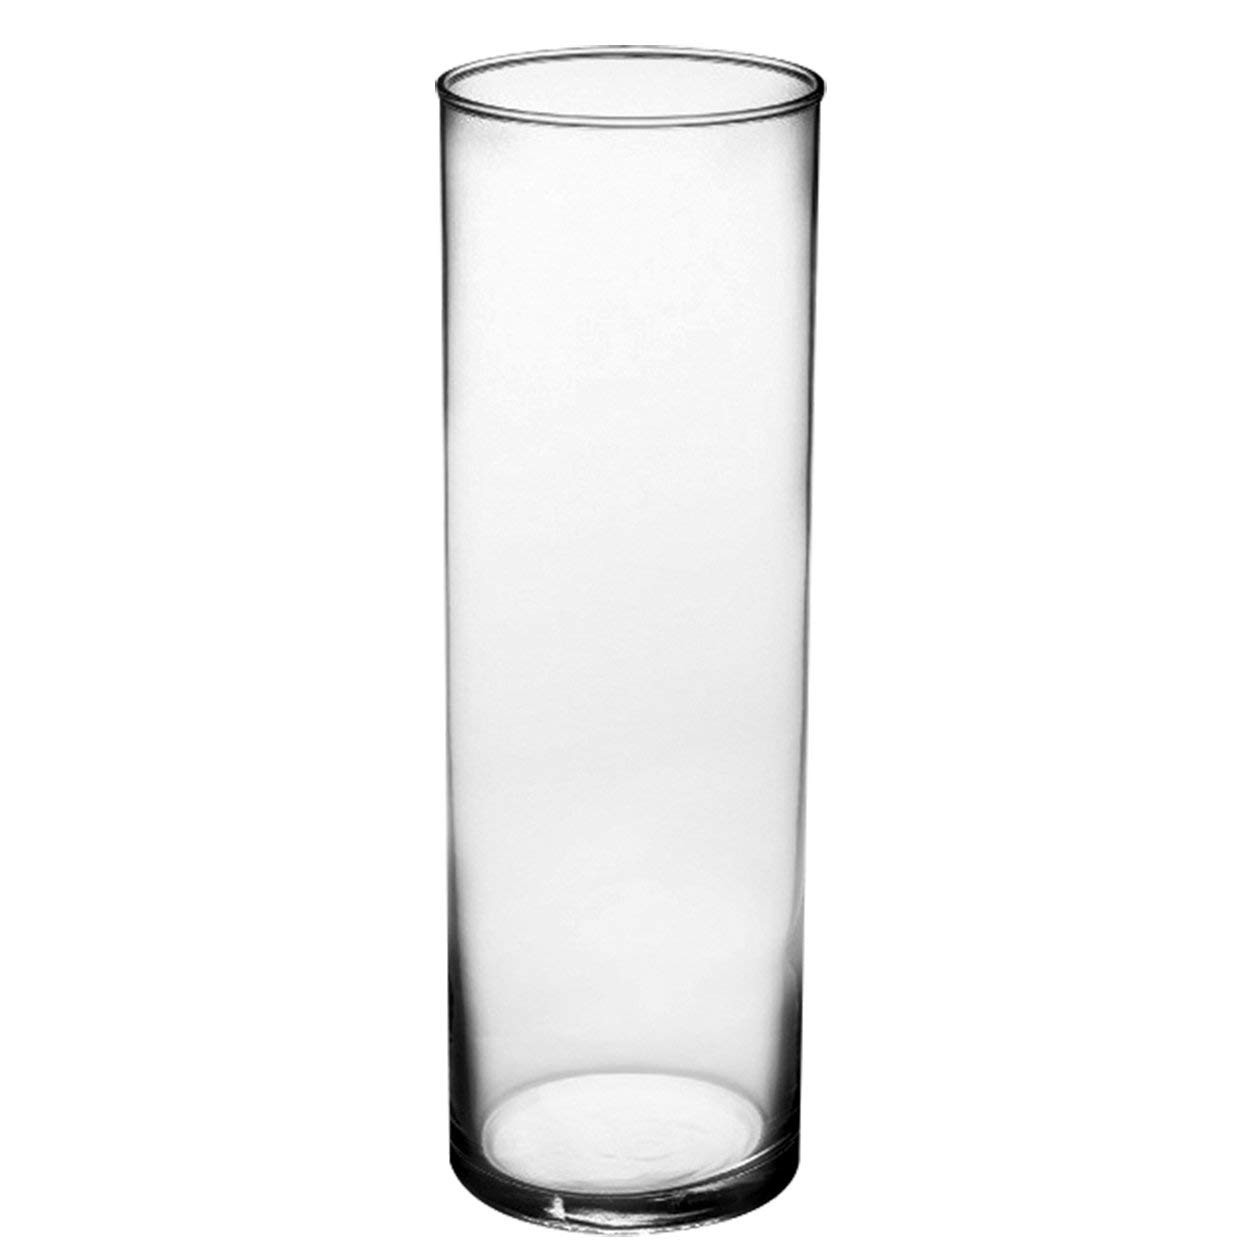 28 Trendy 20 Inch Cylinder Vases 2024 free download 20 inch cylinder vases of amazon com syndicate sales 3 1 2 x 10 1 2 cylinder vase clear within amazon com syndicate sales 3 1 2 x 10 1 2 cylinder vase clear planters garden outdoor